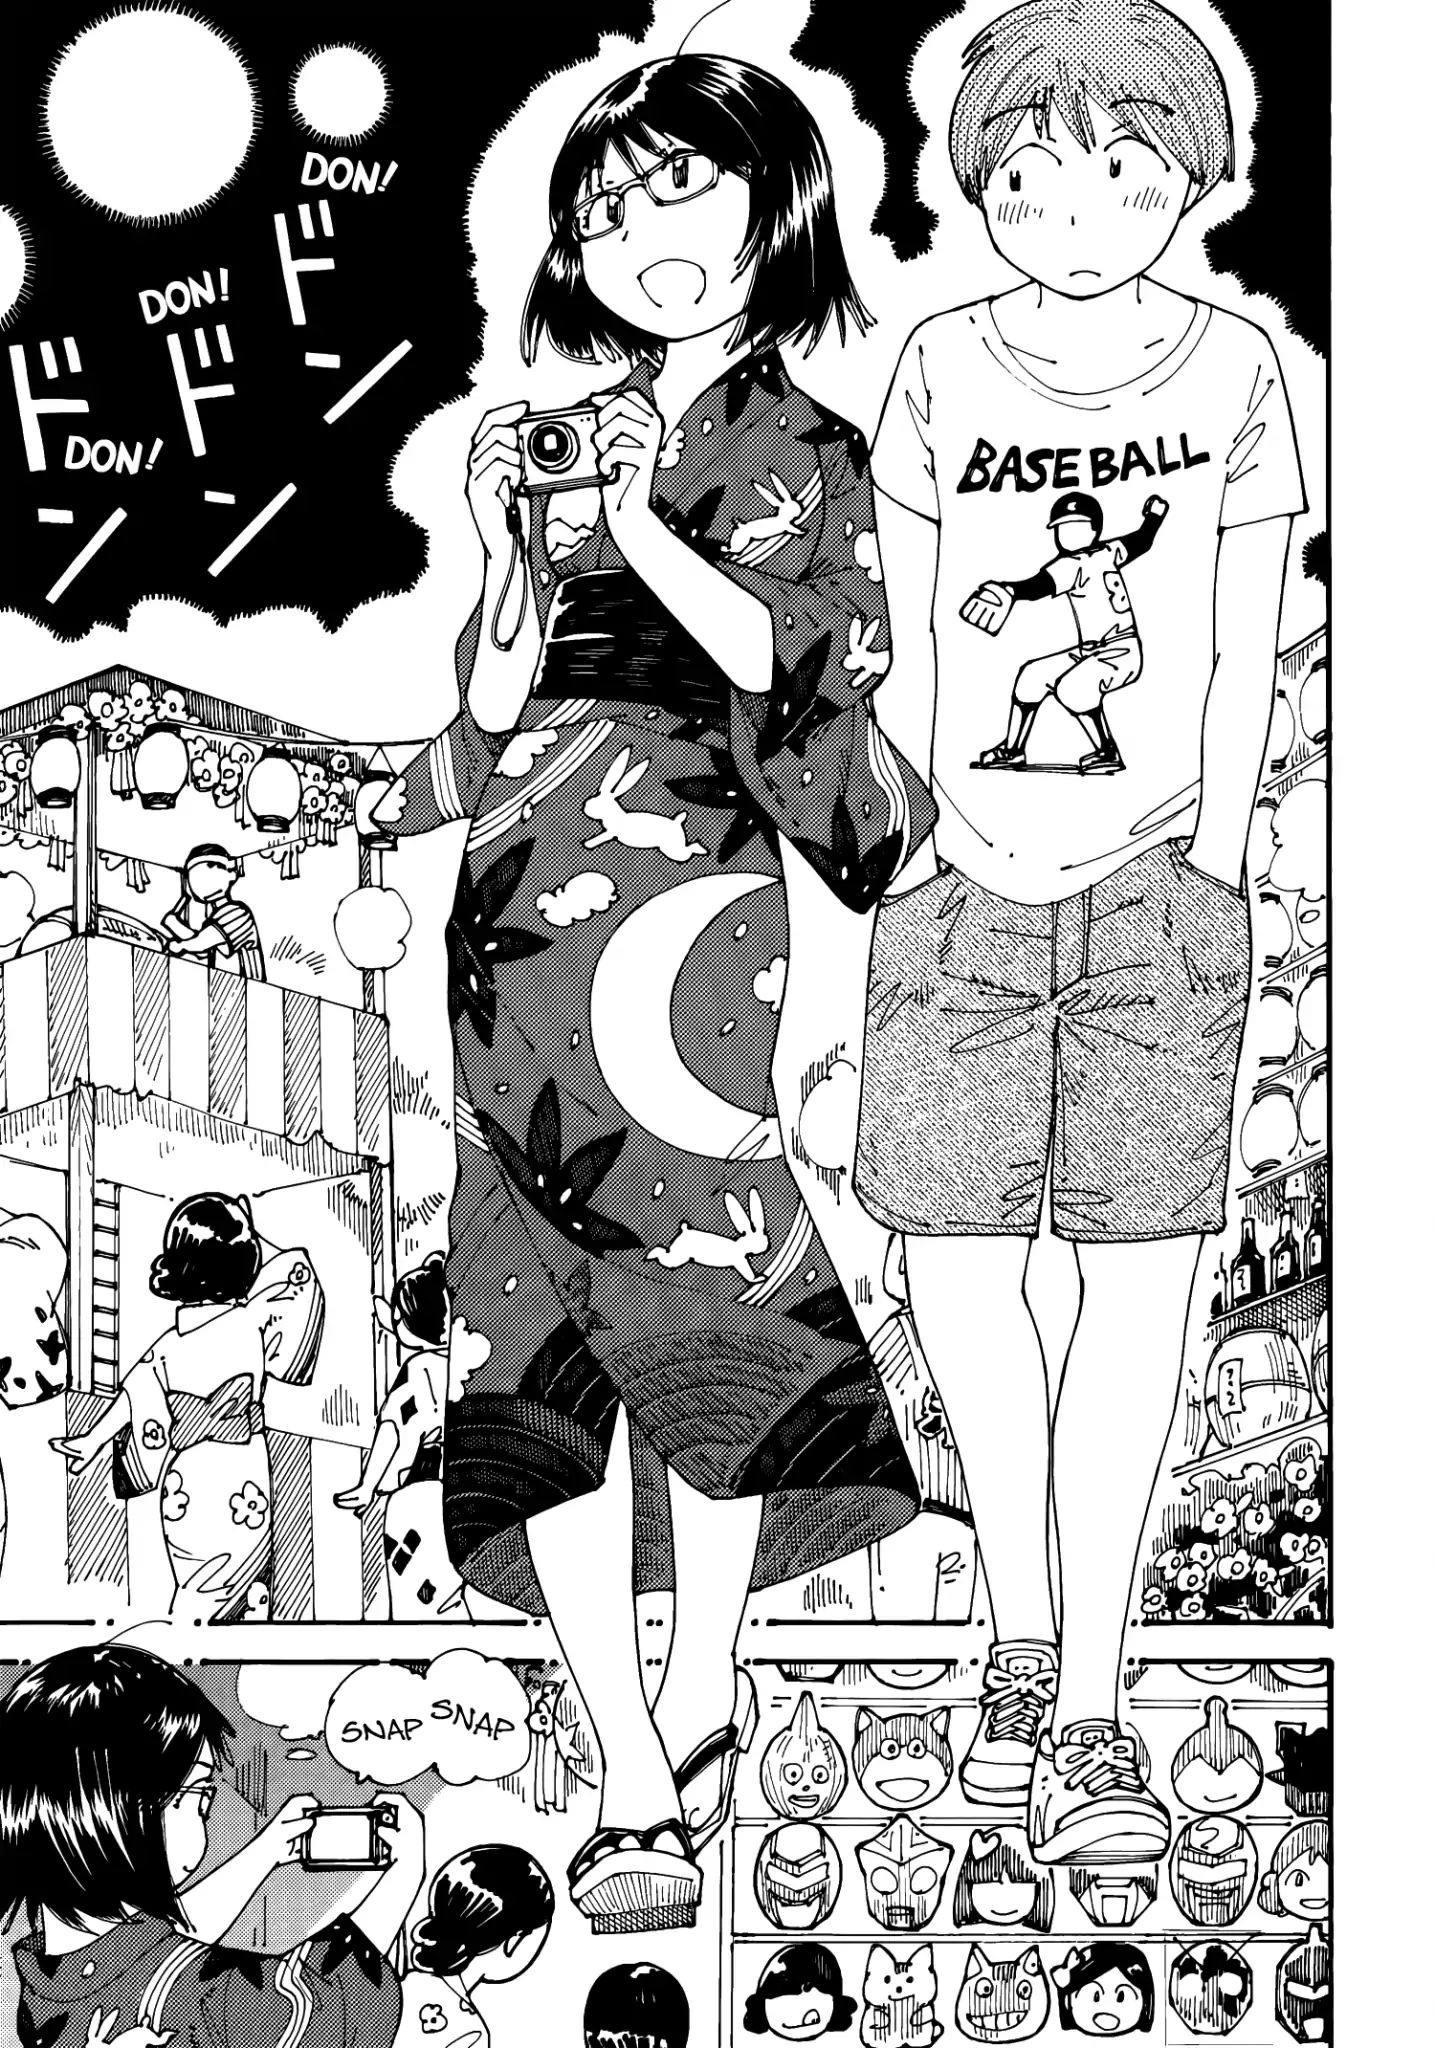 Ookumo-chan Flashback Vol.3 Chapter 15: Minoru... You'd Go to the Summer Festival, Together with Me?